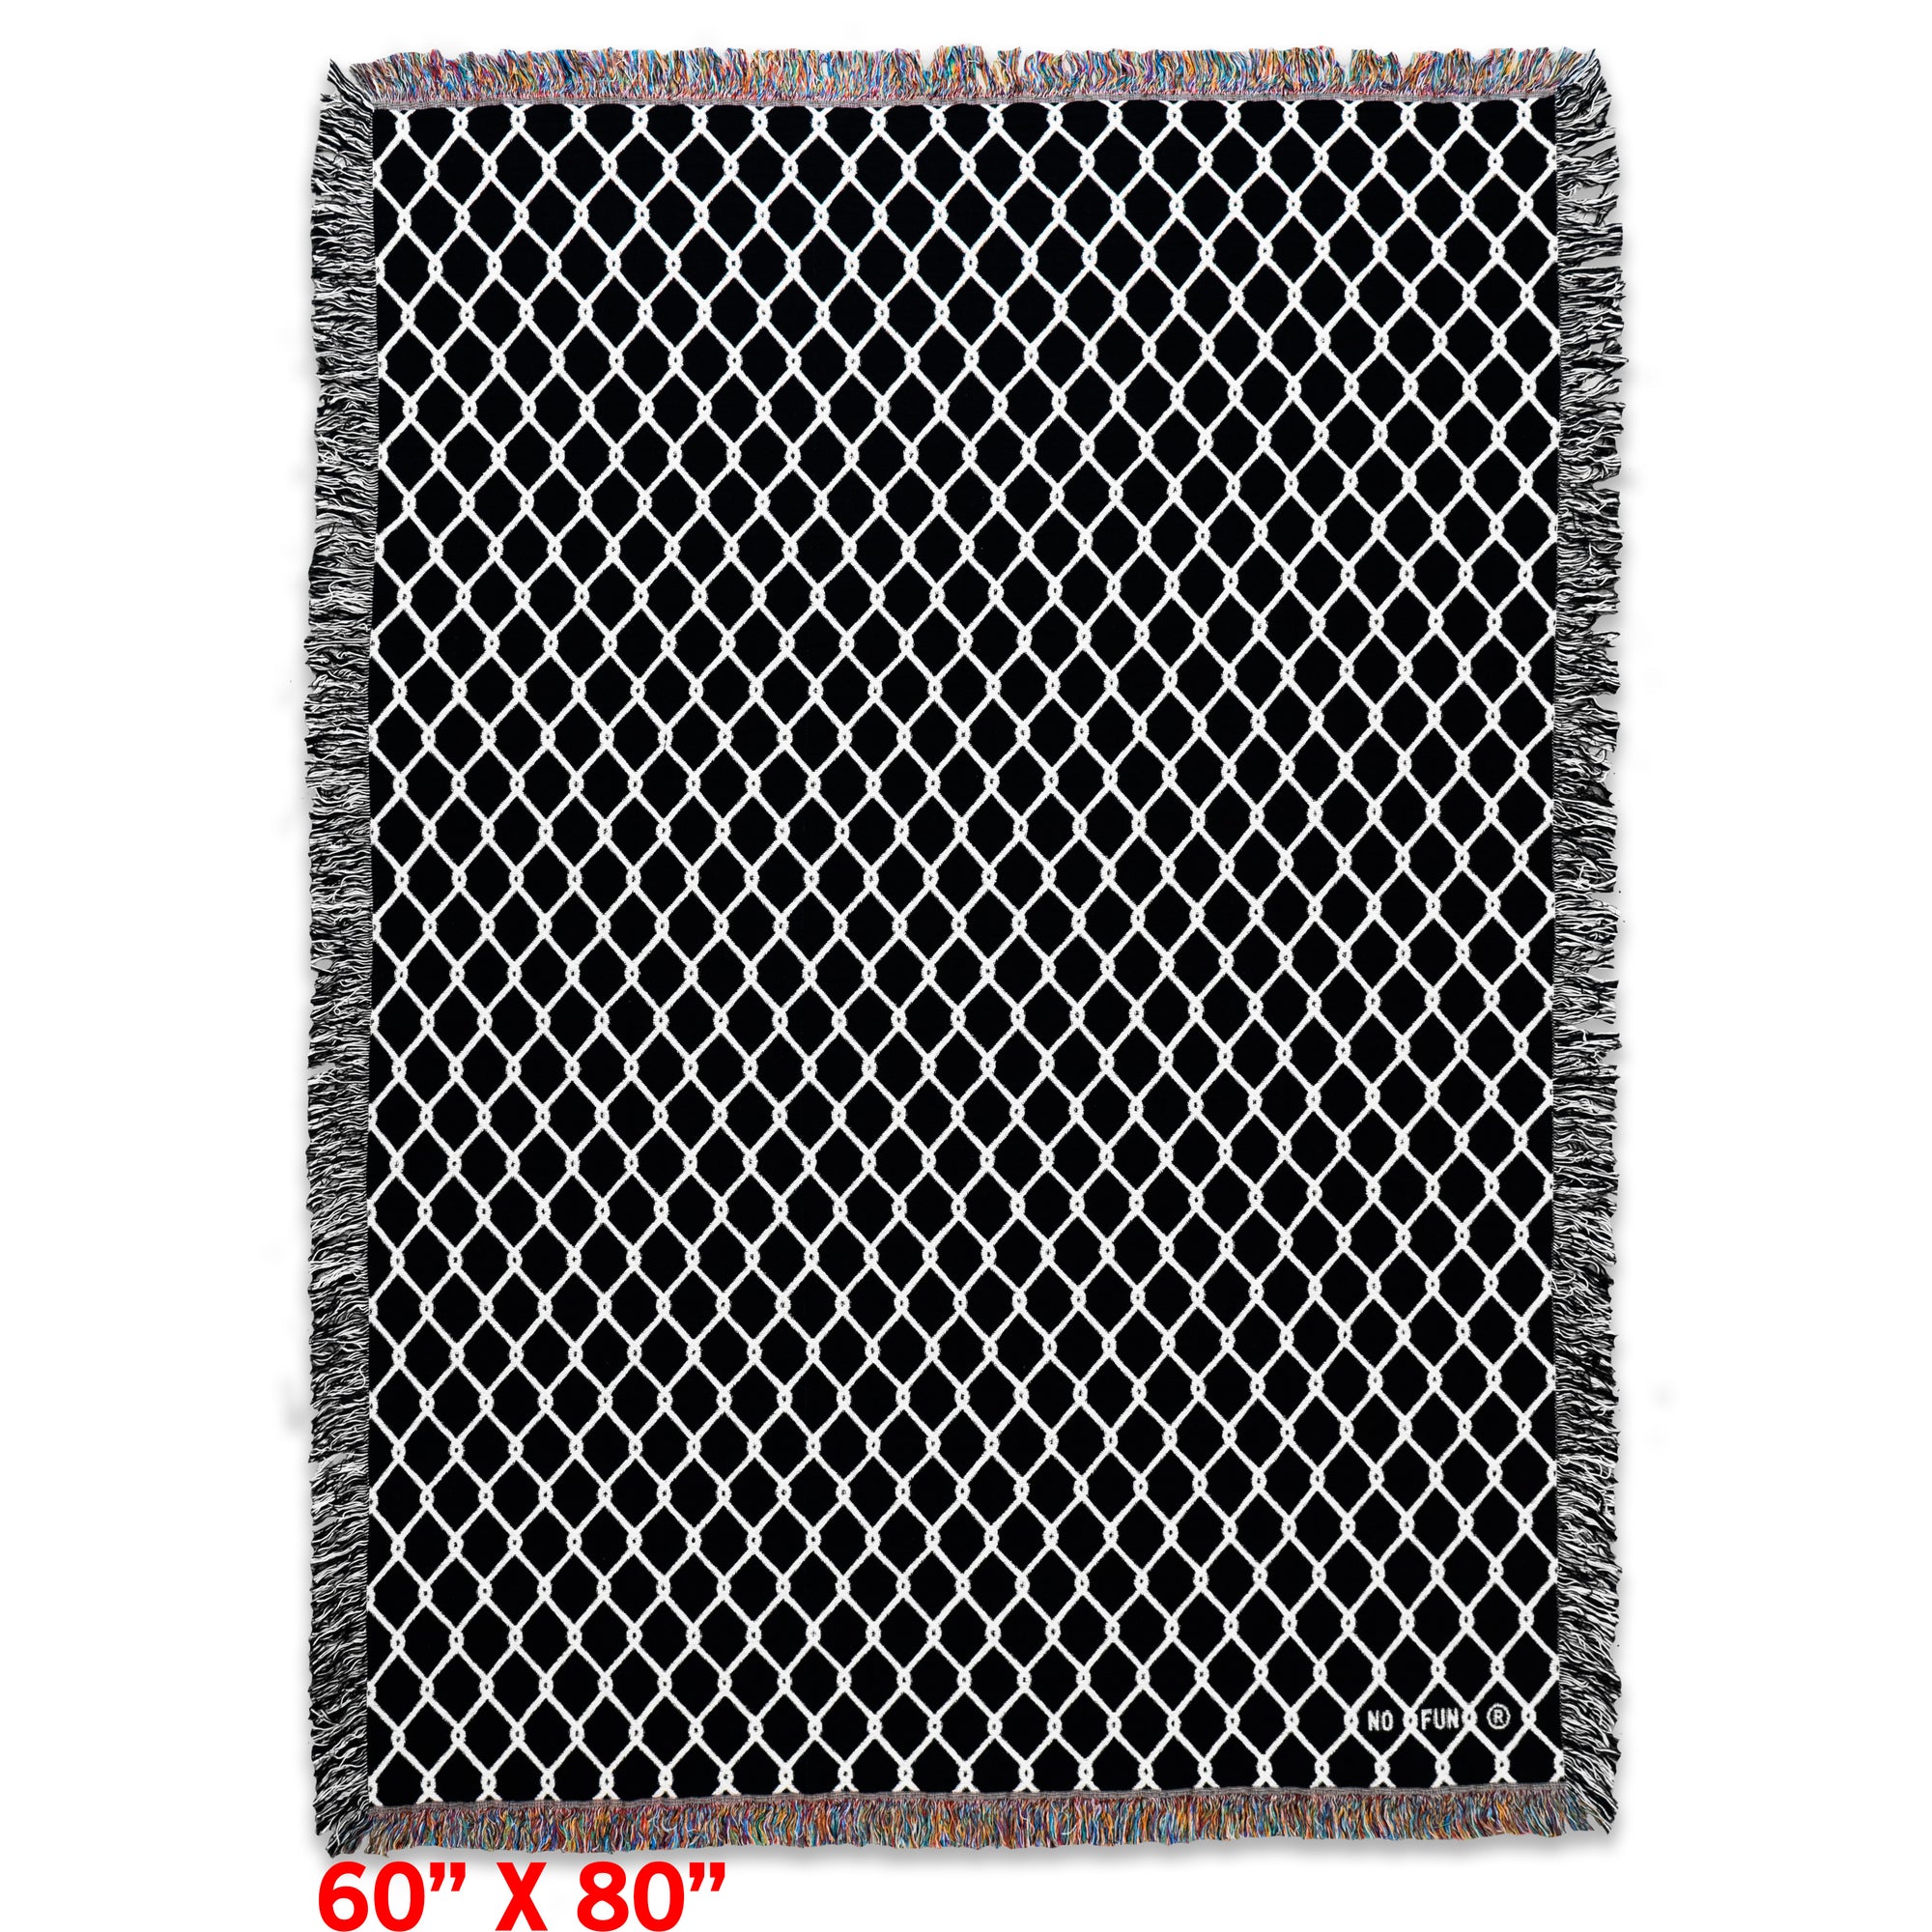 The original "Chainlink" Woven Blanket from No Fun®.  Woven blanket is black, with white chainlink design and is photographed flat against a white background.  There is a small "No Fun®" logo in the bottom right-hand corner of the blanket.  There is read text that reads "60" X 80" in the bottom left-hand corner, specifying the blankets size.